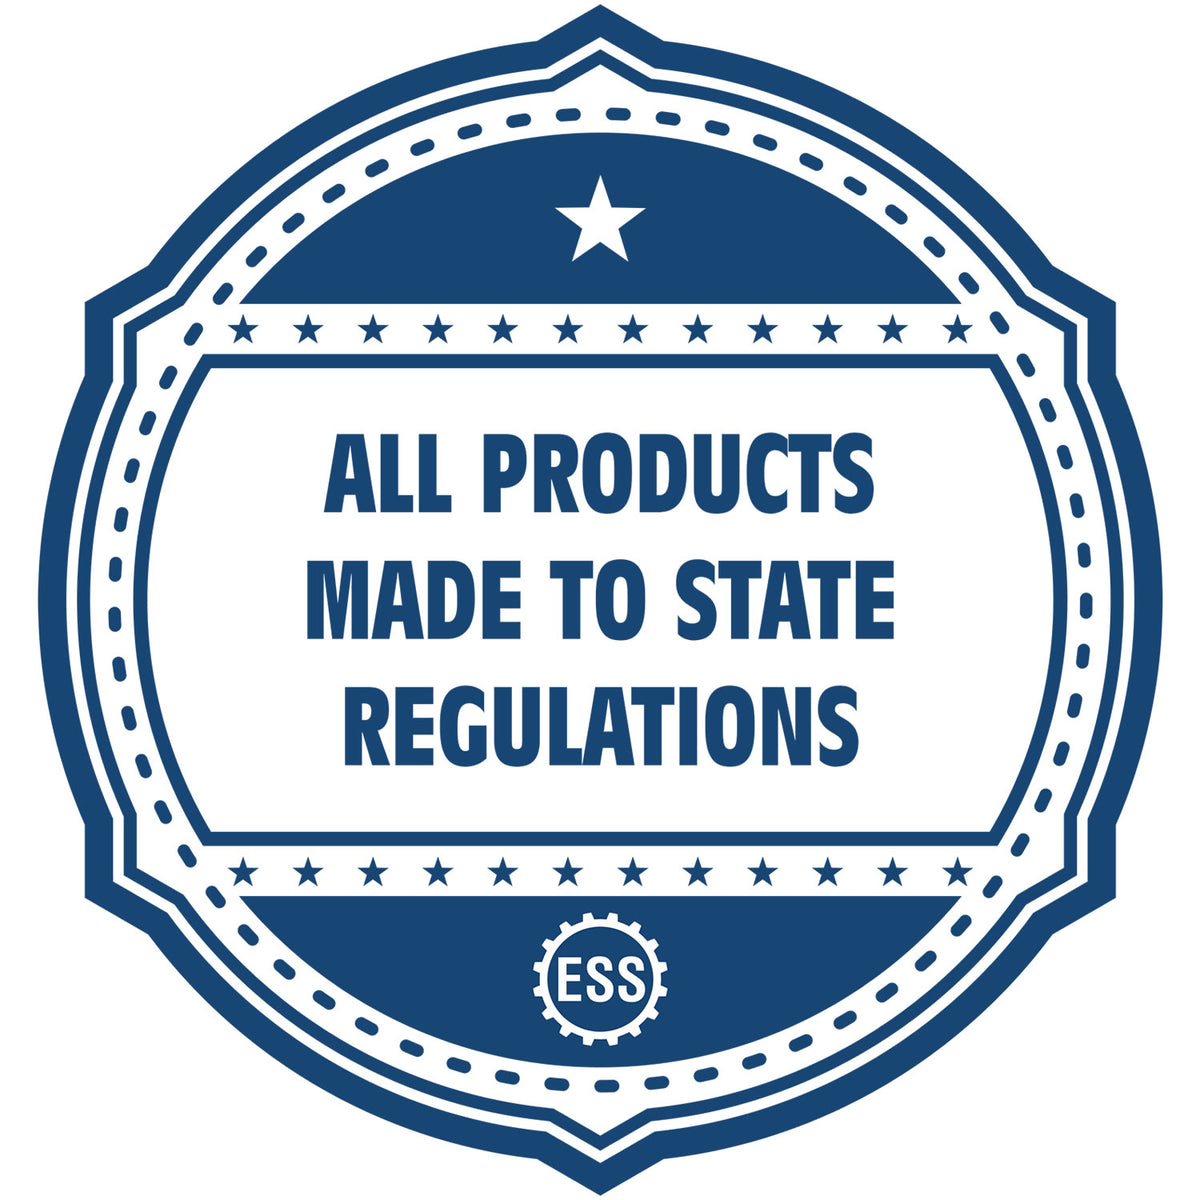 A blue icon or badge for the Soft Missouri Professional Geologist Seal showing that this product is made in compliance with state regulations.